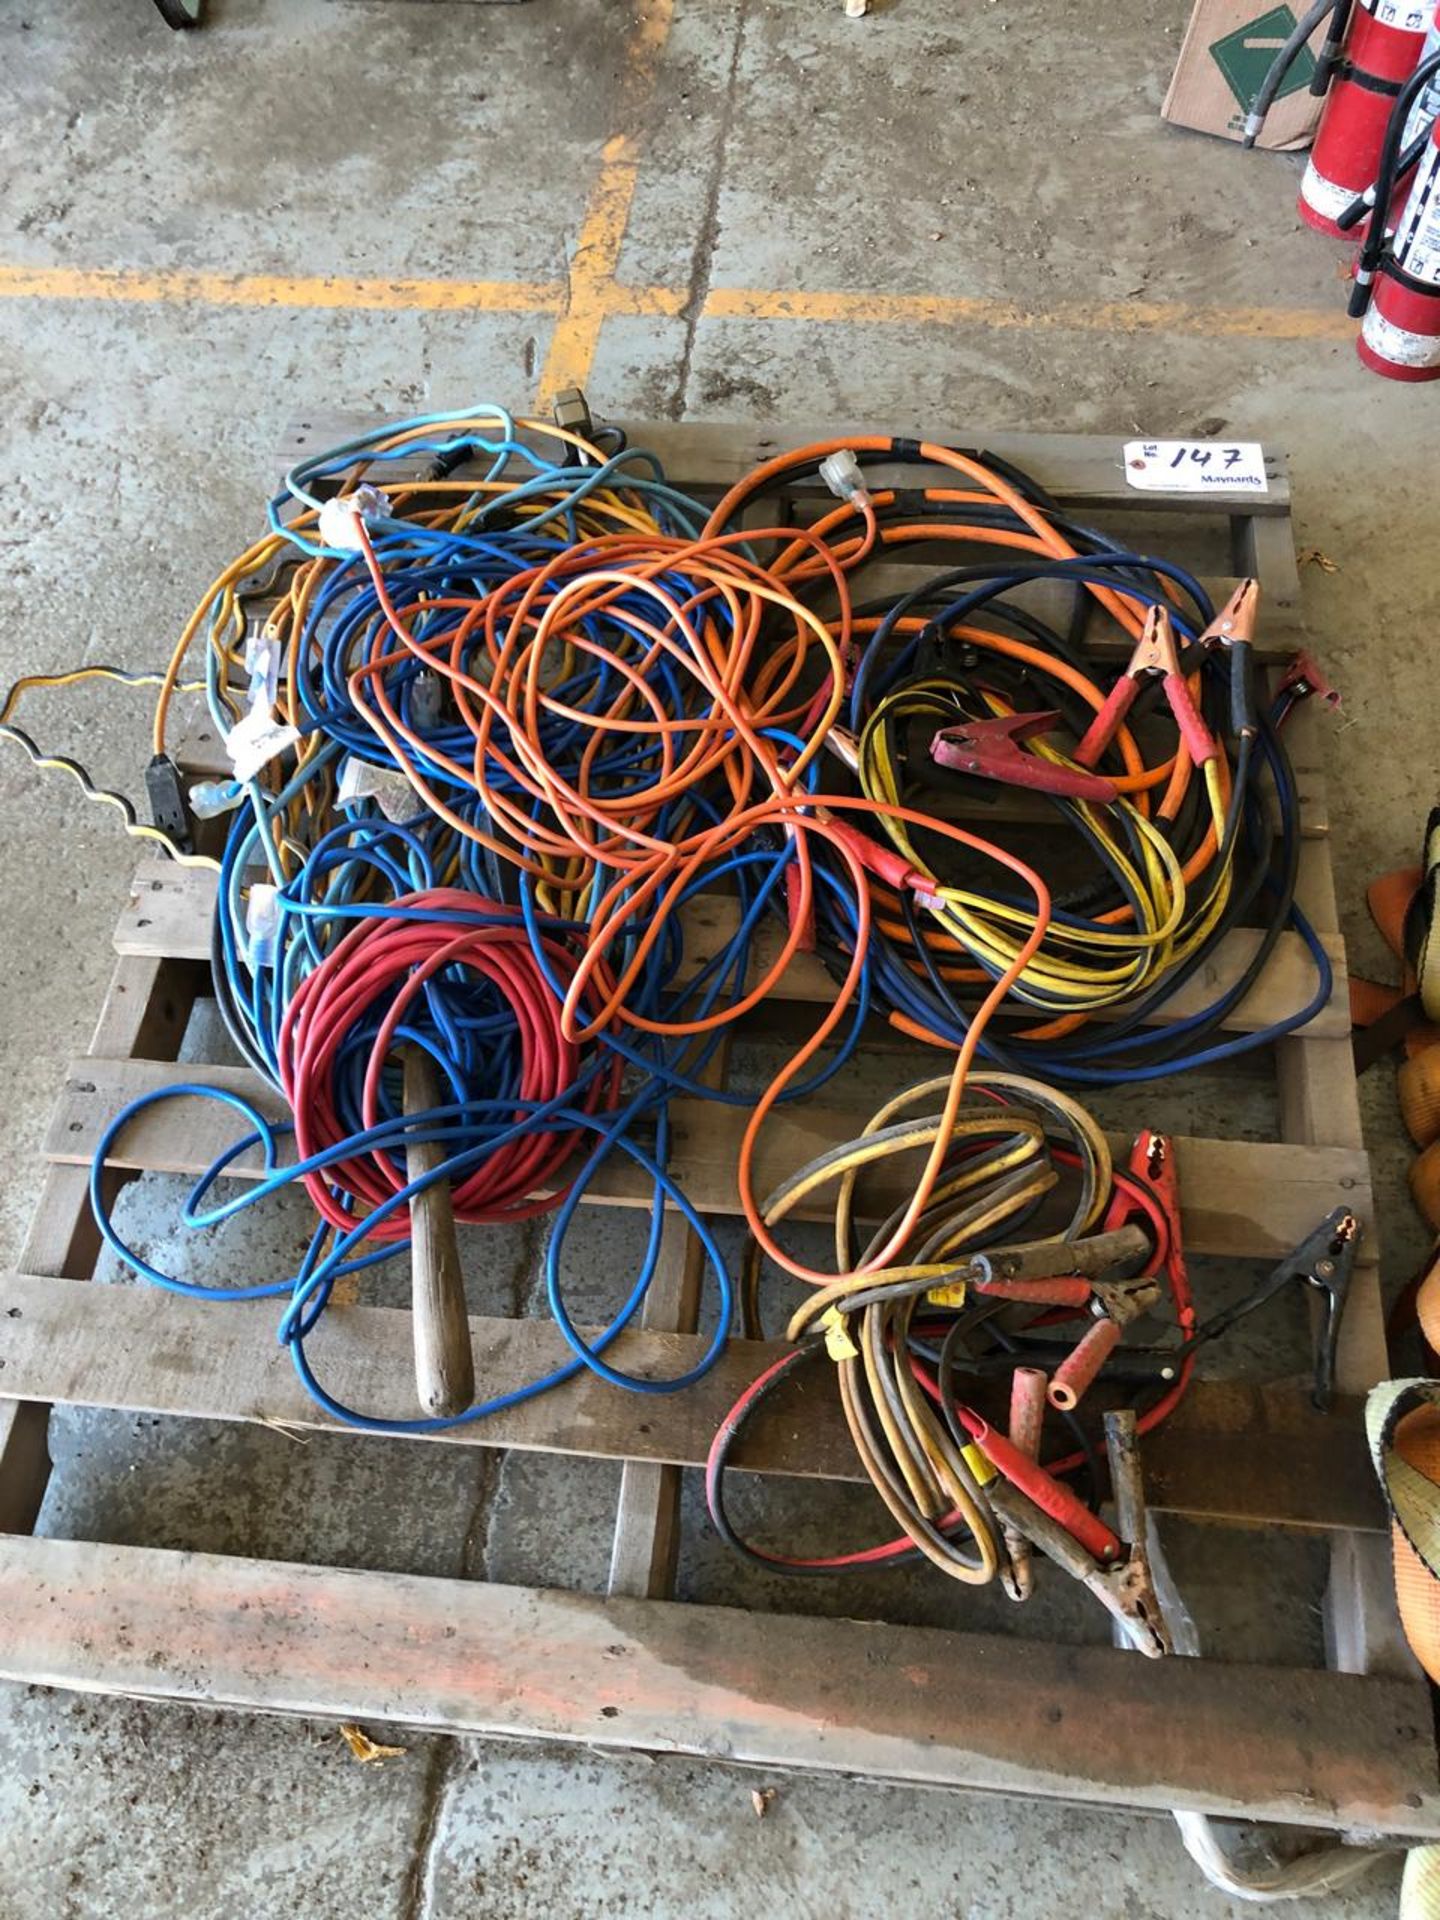 Skid of Jumper Cables and Extention Cords